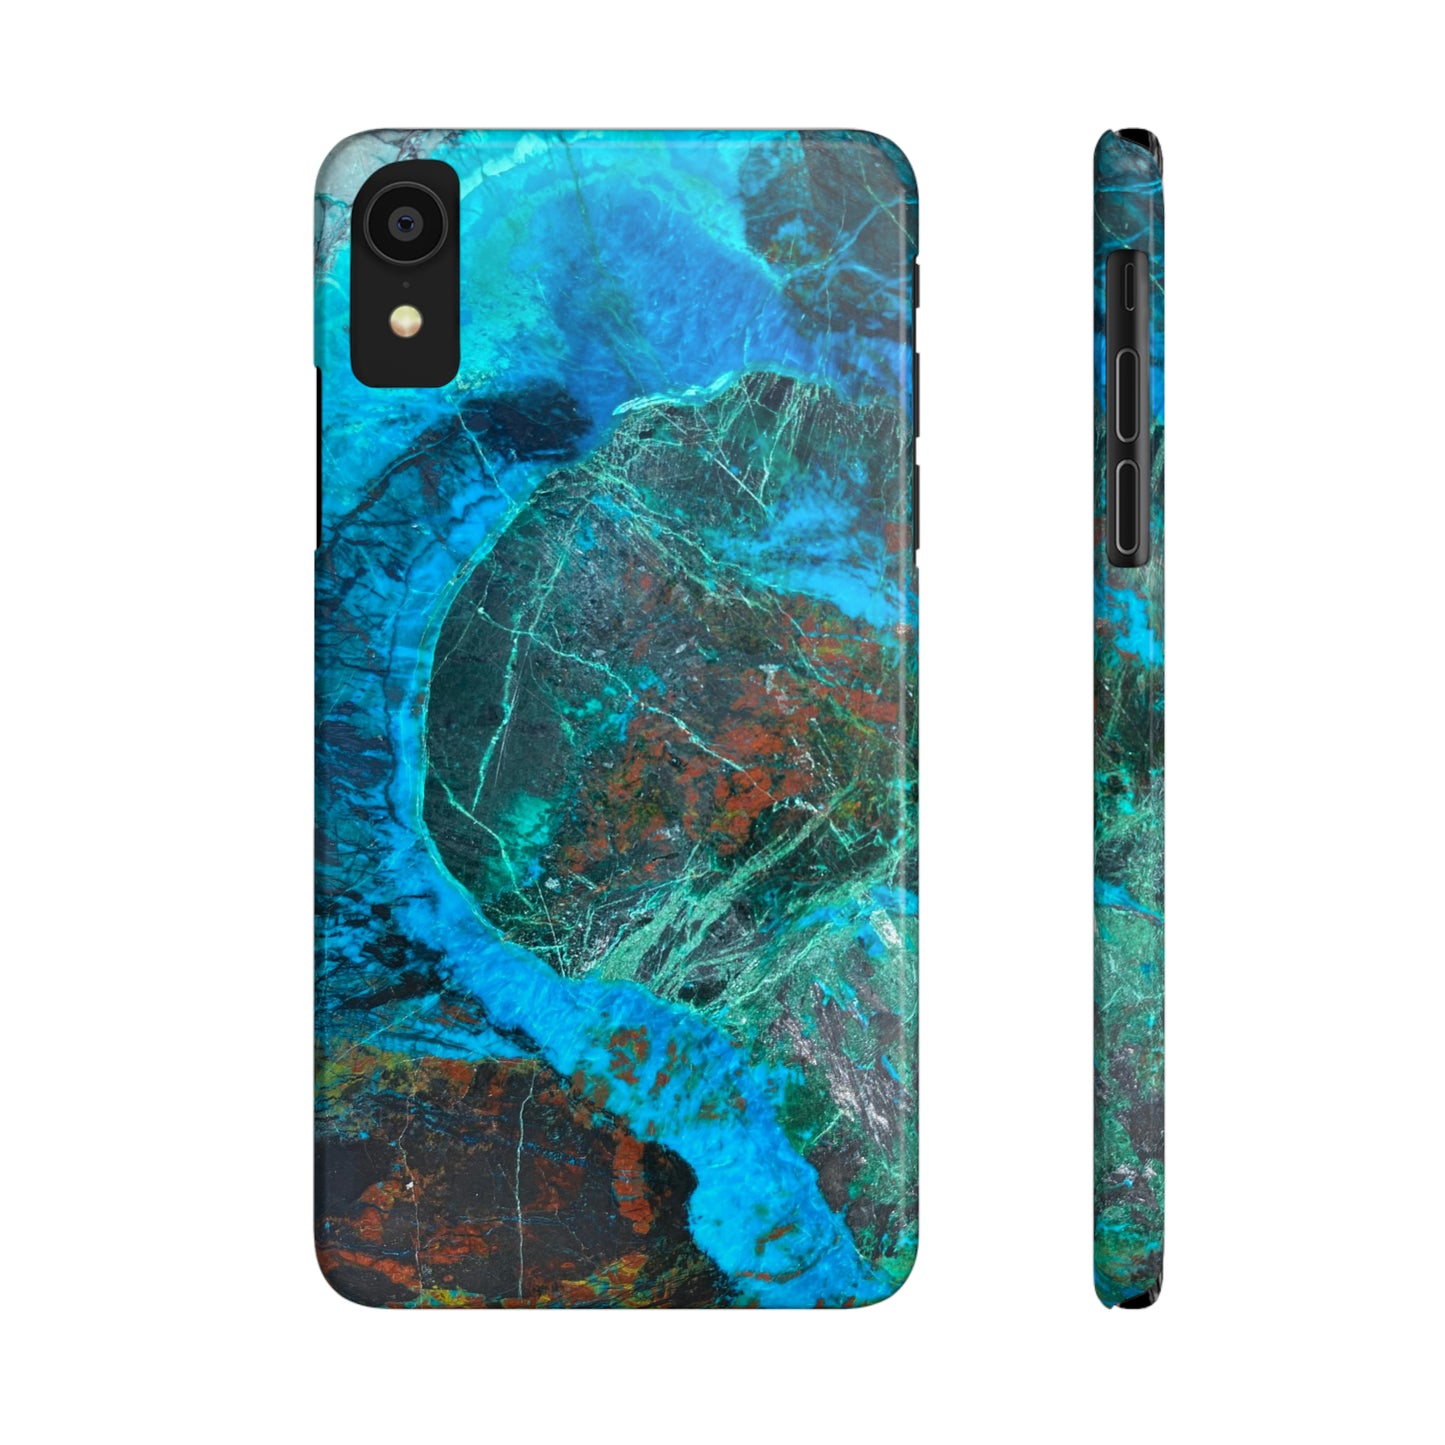 Slim Phone Cases - Chrysocolla Mineral Mix Design A